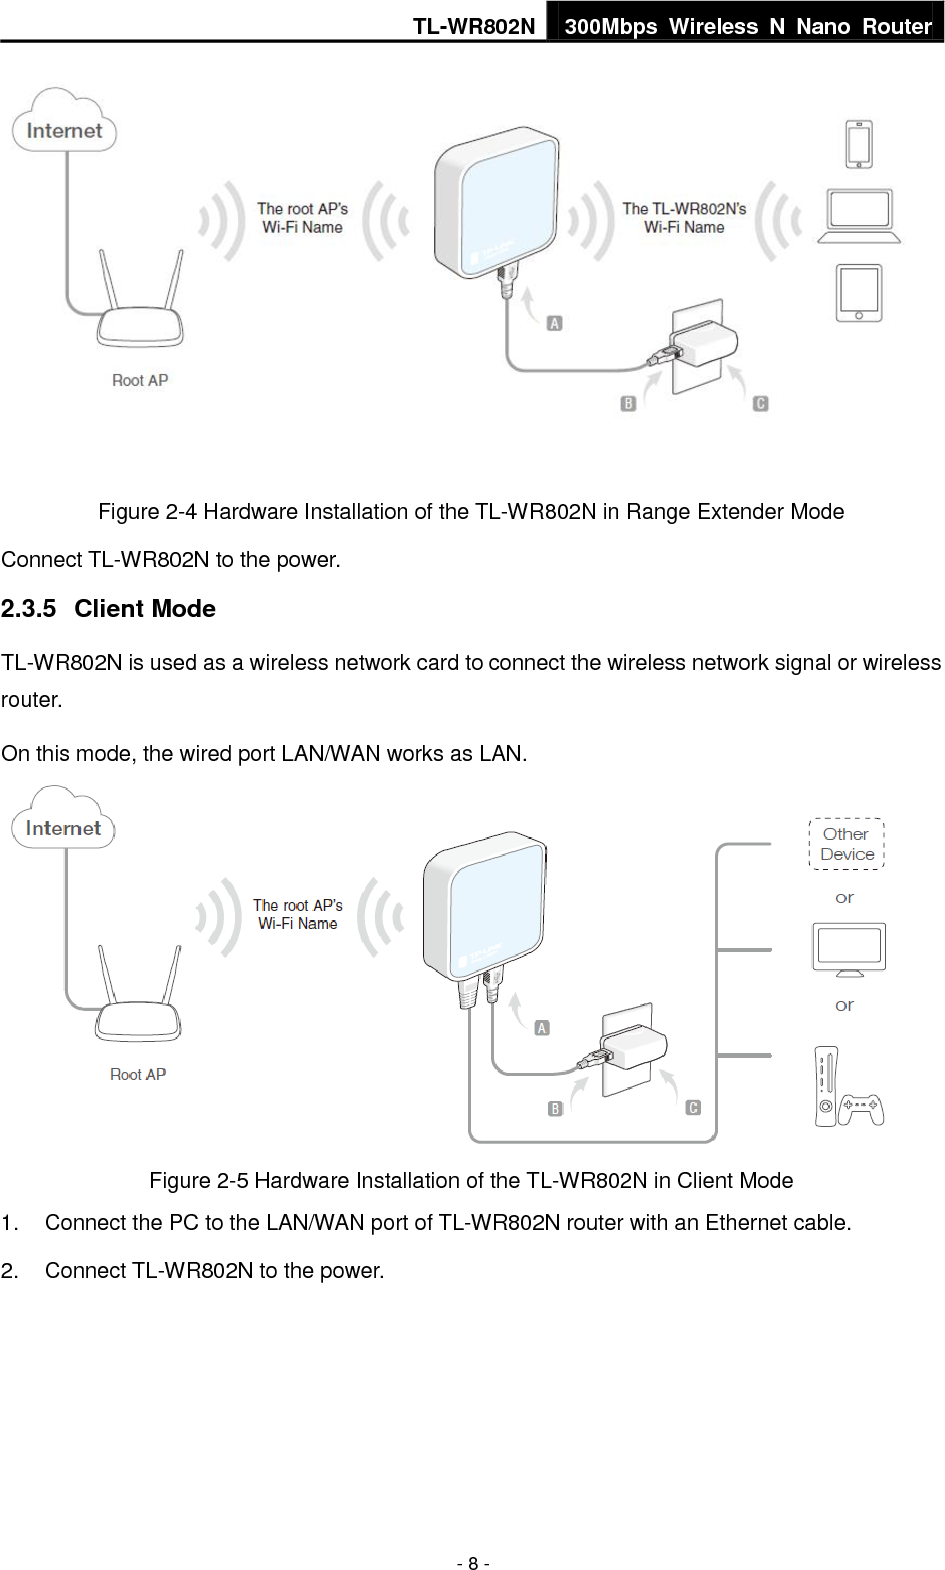 TL-WR802N 300Mbps  Wireless  N  Nano  Router  - 8 -  Figure 2-4 Hardware Installation of the TL-WR802N in Range Extender Mode Connect TL-WR802N to the power. 2.3.5  Client Mode TL-WR802N is used as a wireless network card to connect the wireless network signal or wireless router. On this mode, the wired port LAN/WAN works as LAN.  Figure 2-5 Hardware Installation of the TL-WR802N in Client Mode 1.  Connect the PC to the LAN/WAN port of TL-WR802N router with an Ethernet cable. 2.  Connect TL-WR802N to the power. 